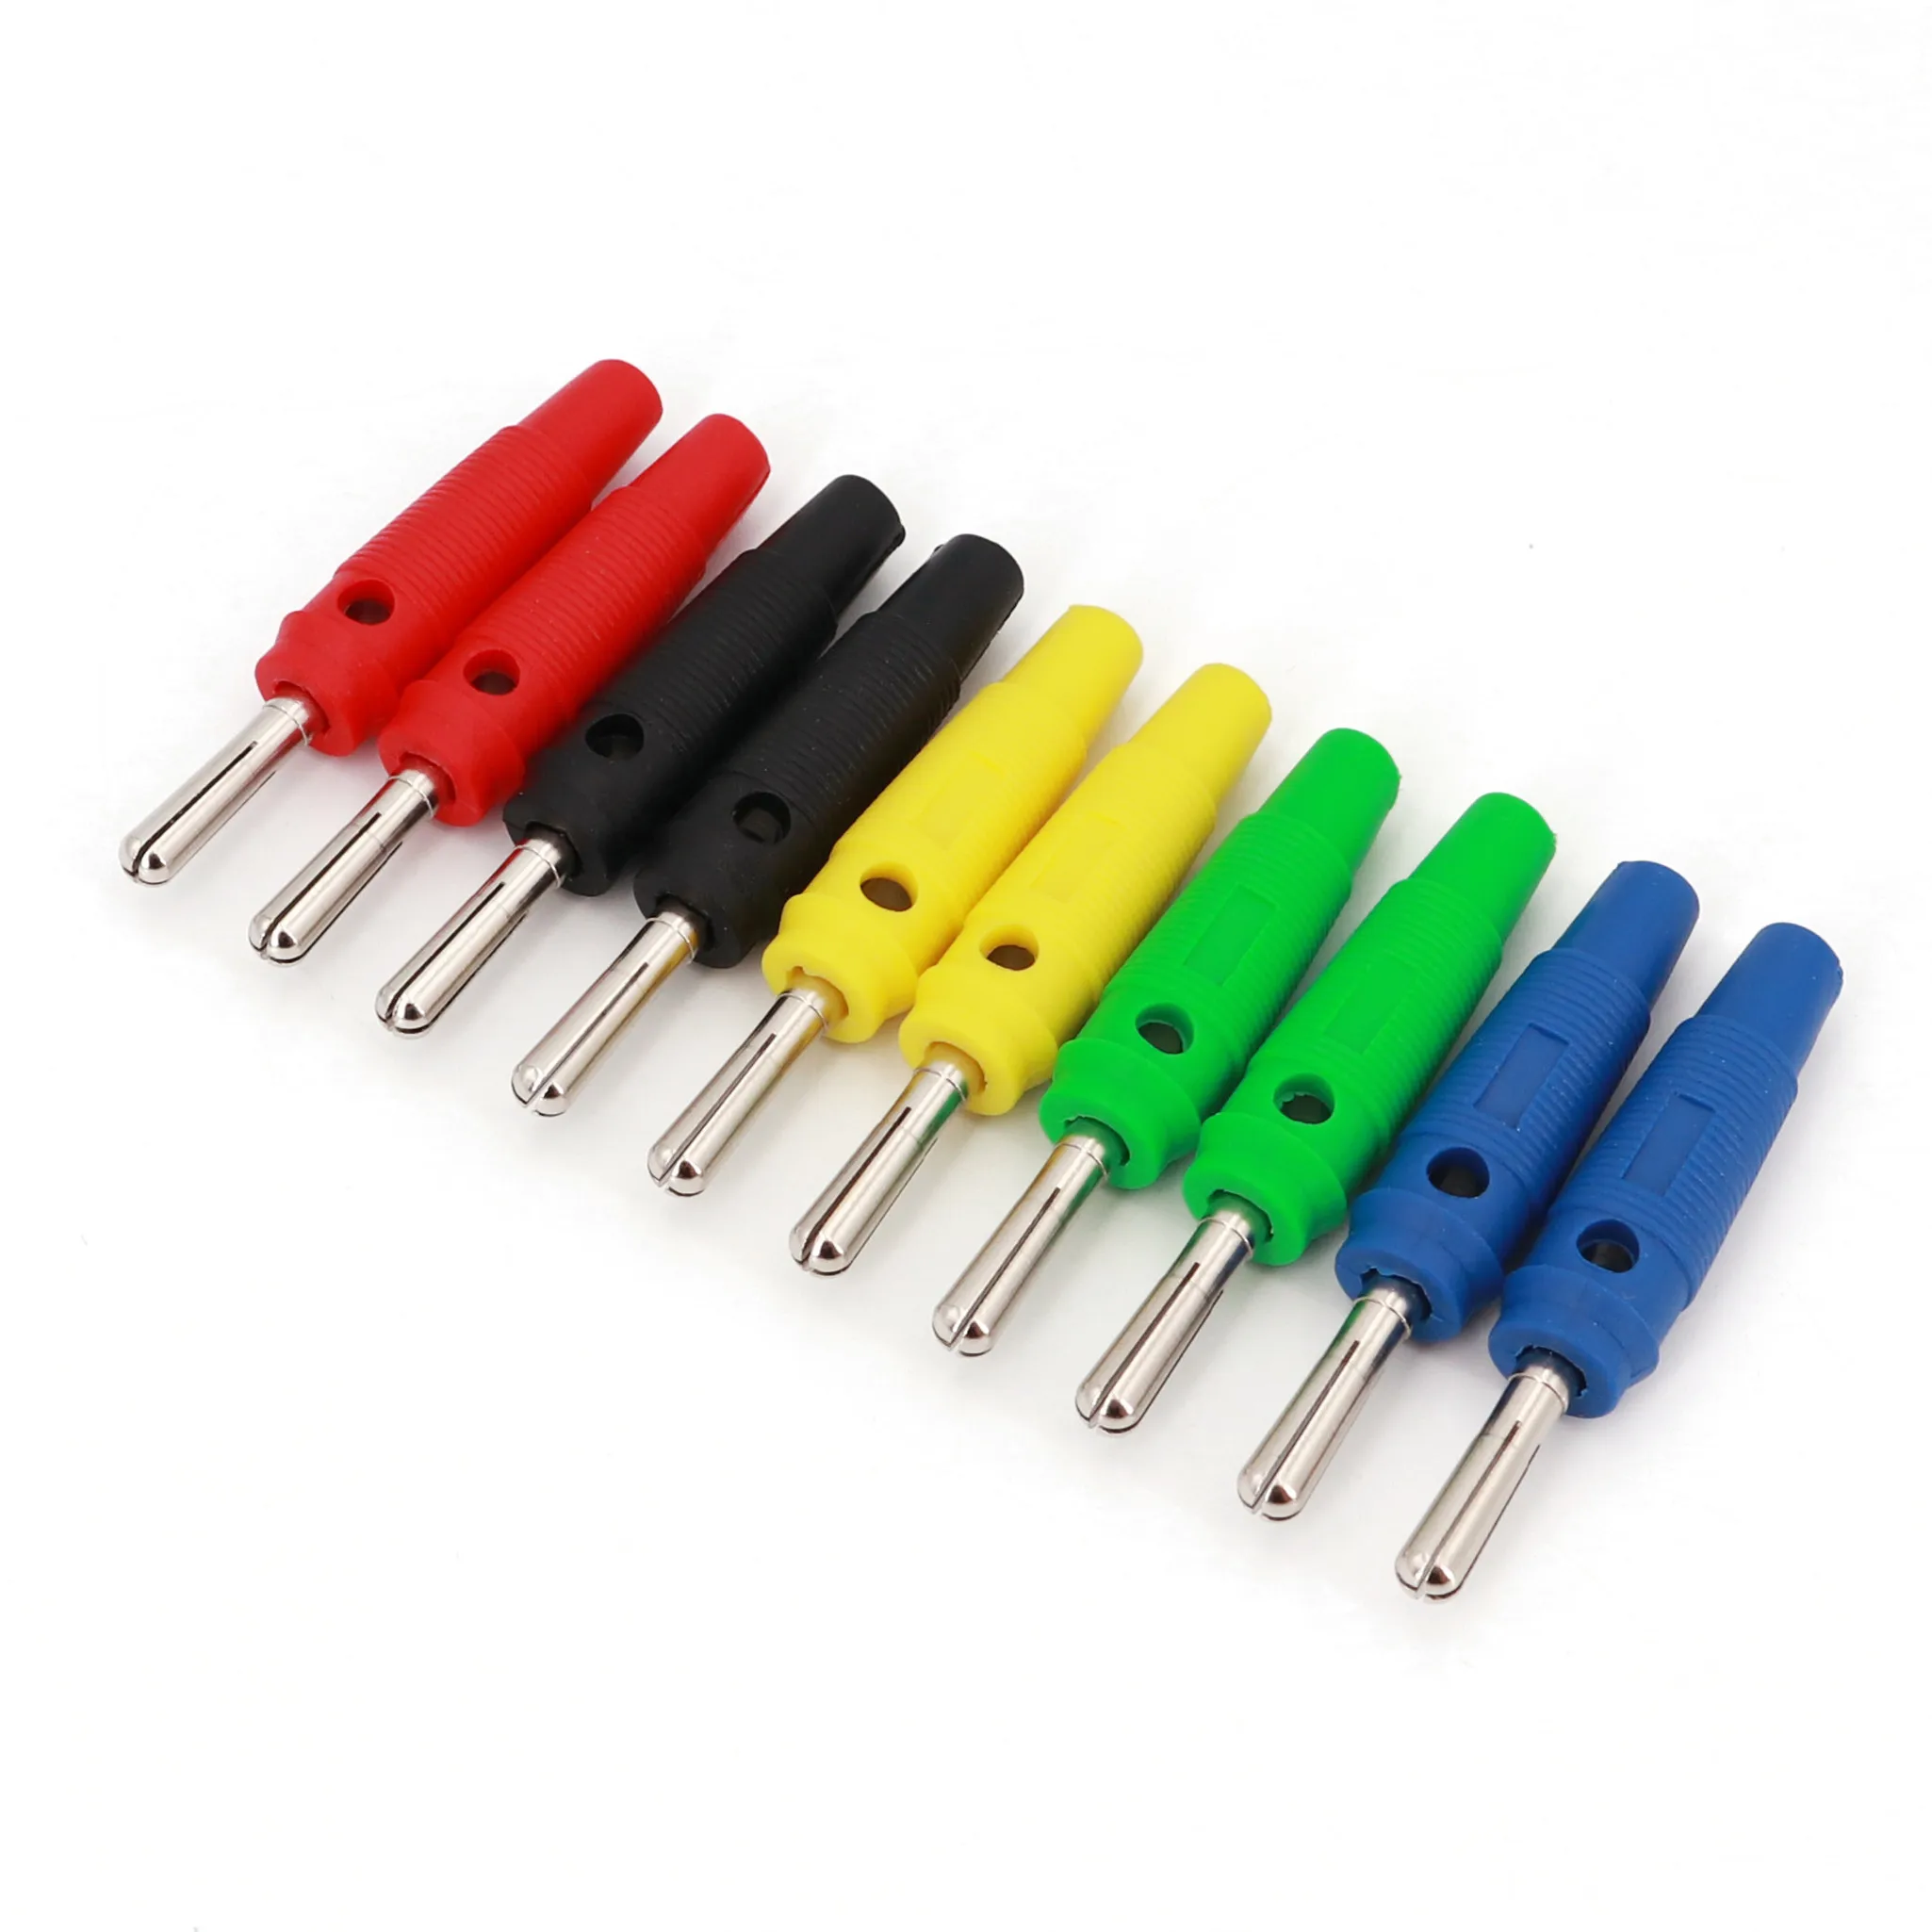 10Pcs Brass Cross High Current 4mm Male Stackable Solder Type Banana Plug Connector